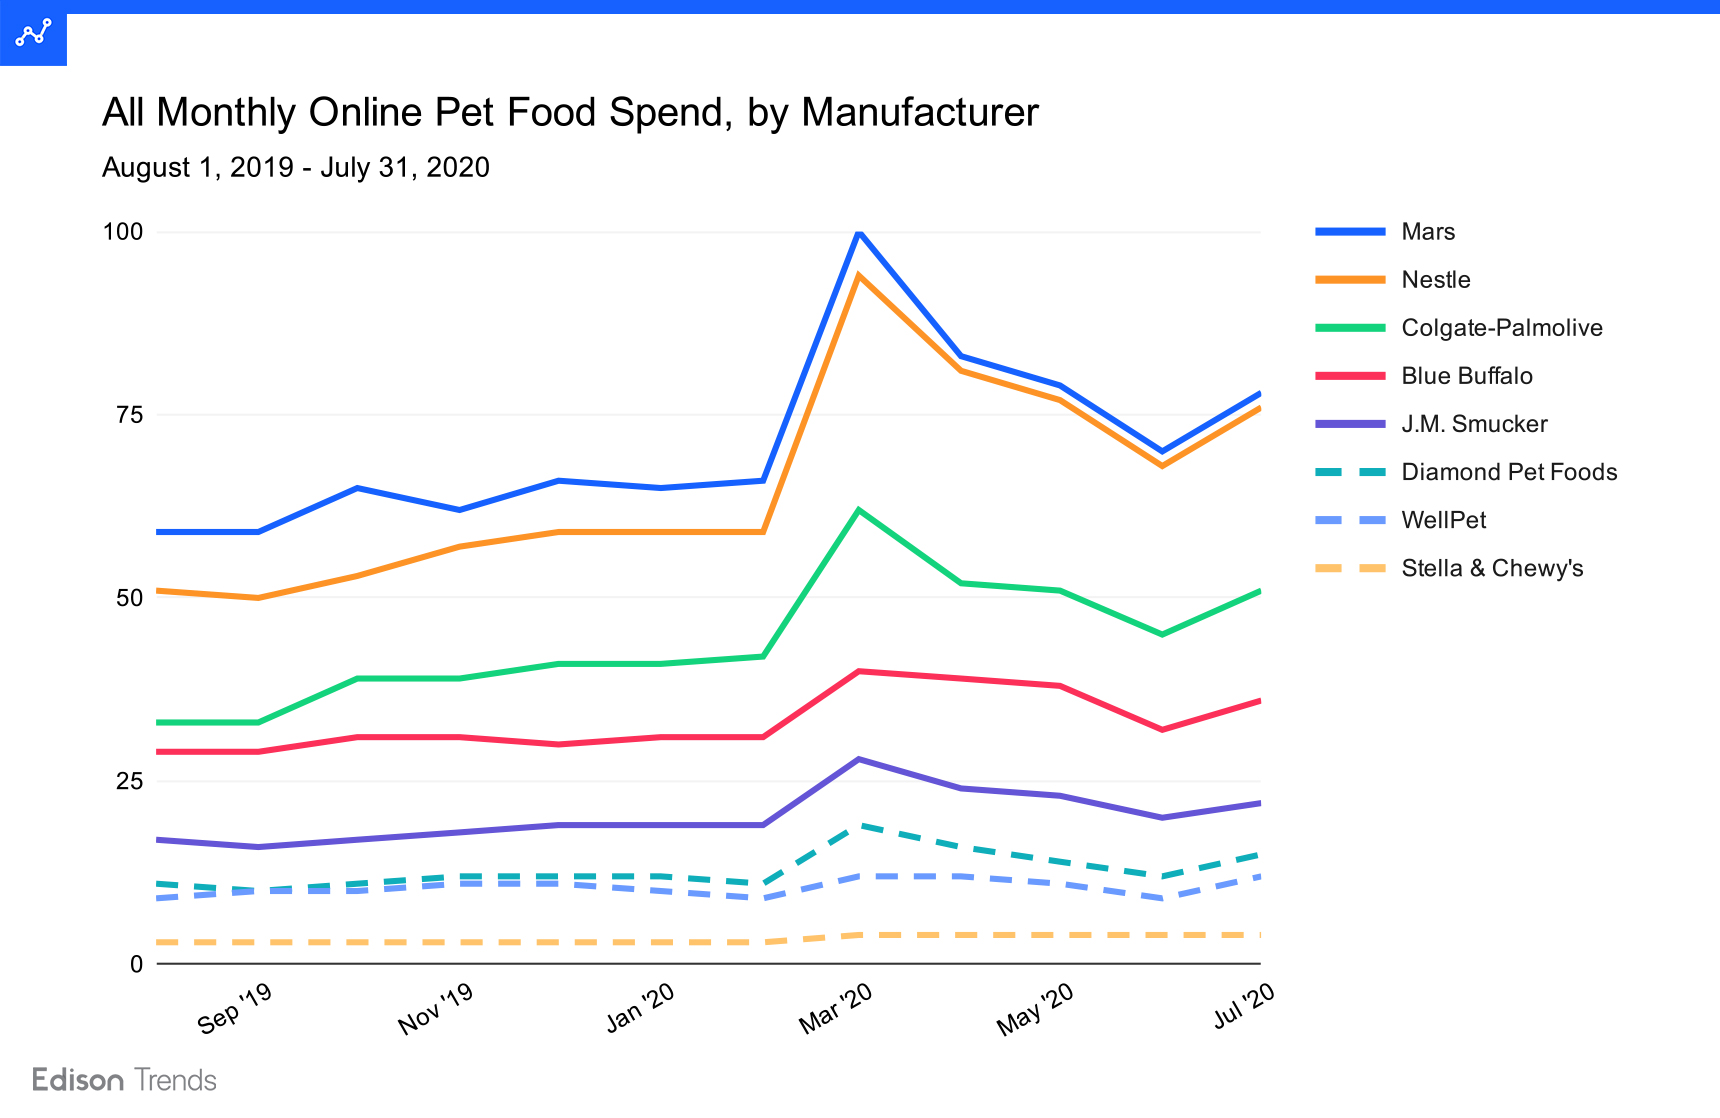 Online Pet Food Sales Up 43% in July over Previous July ...